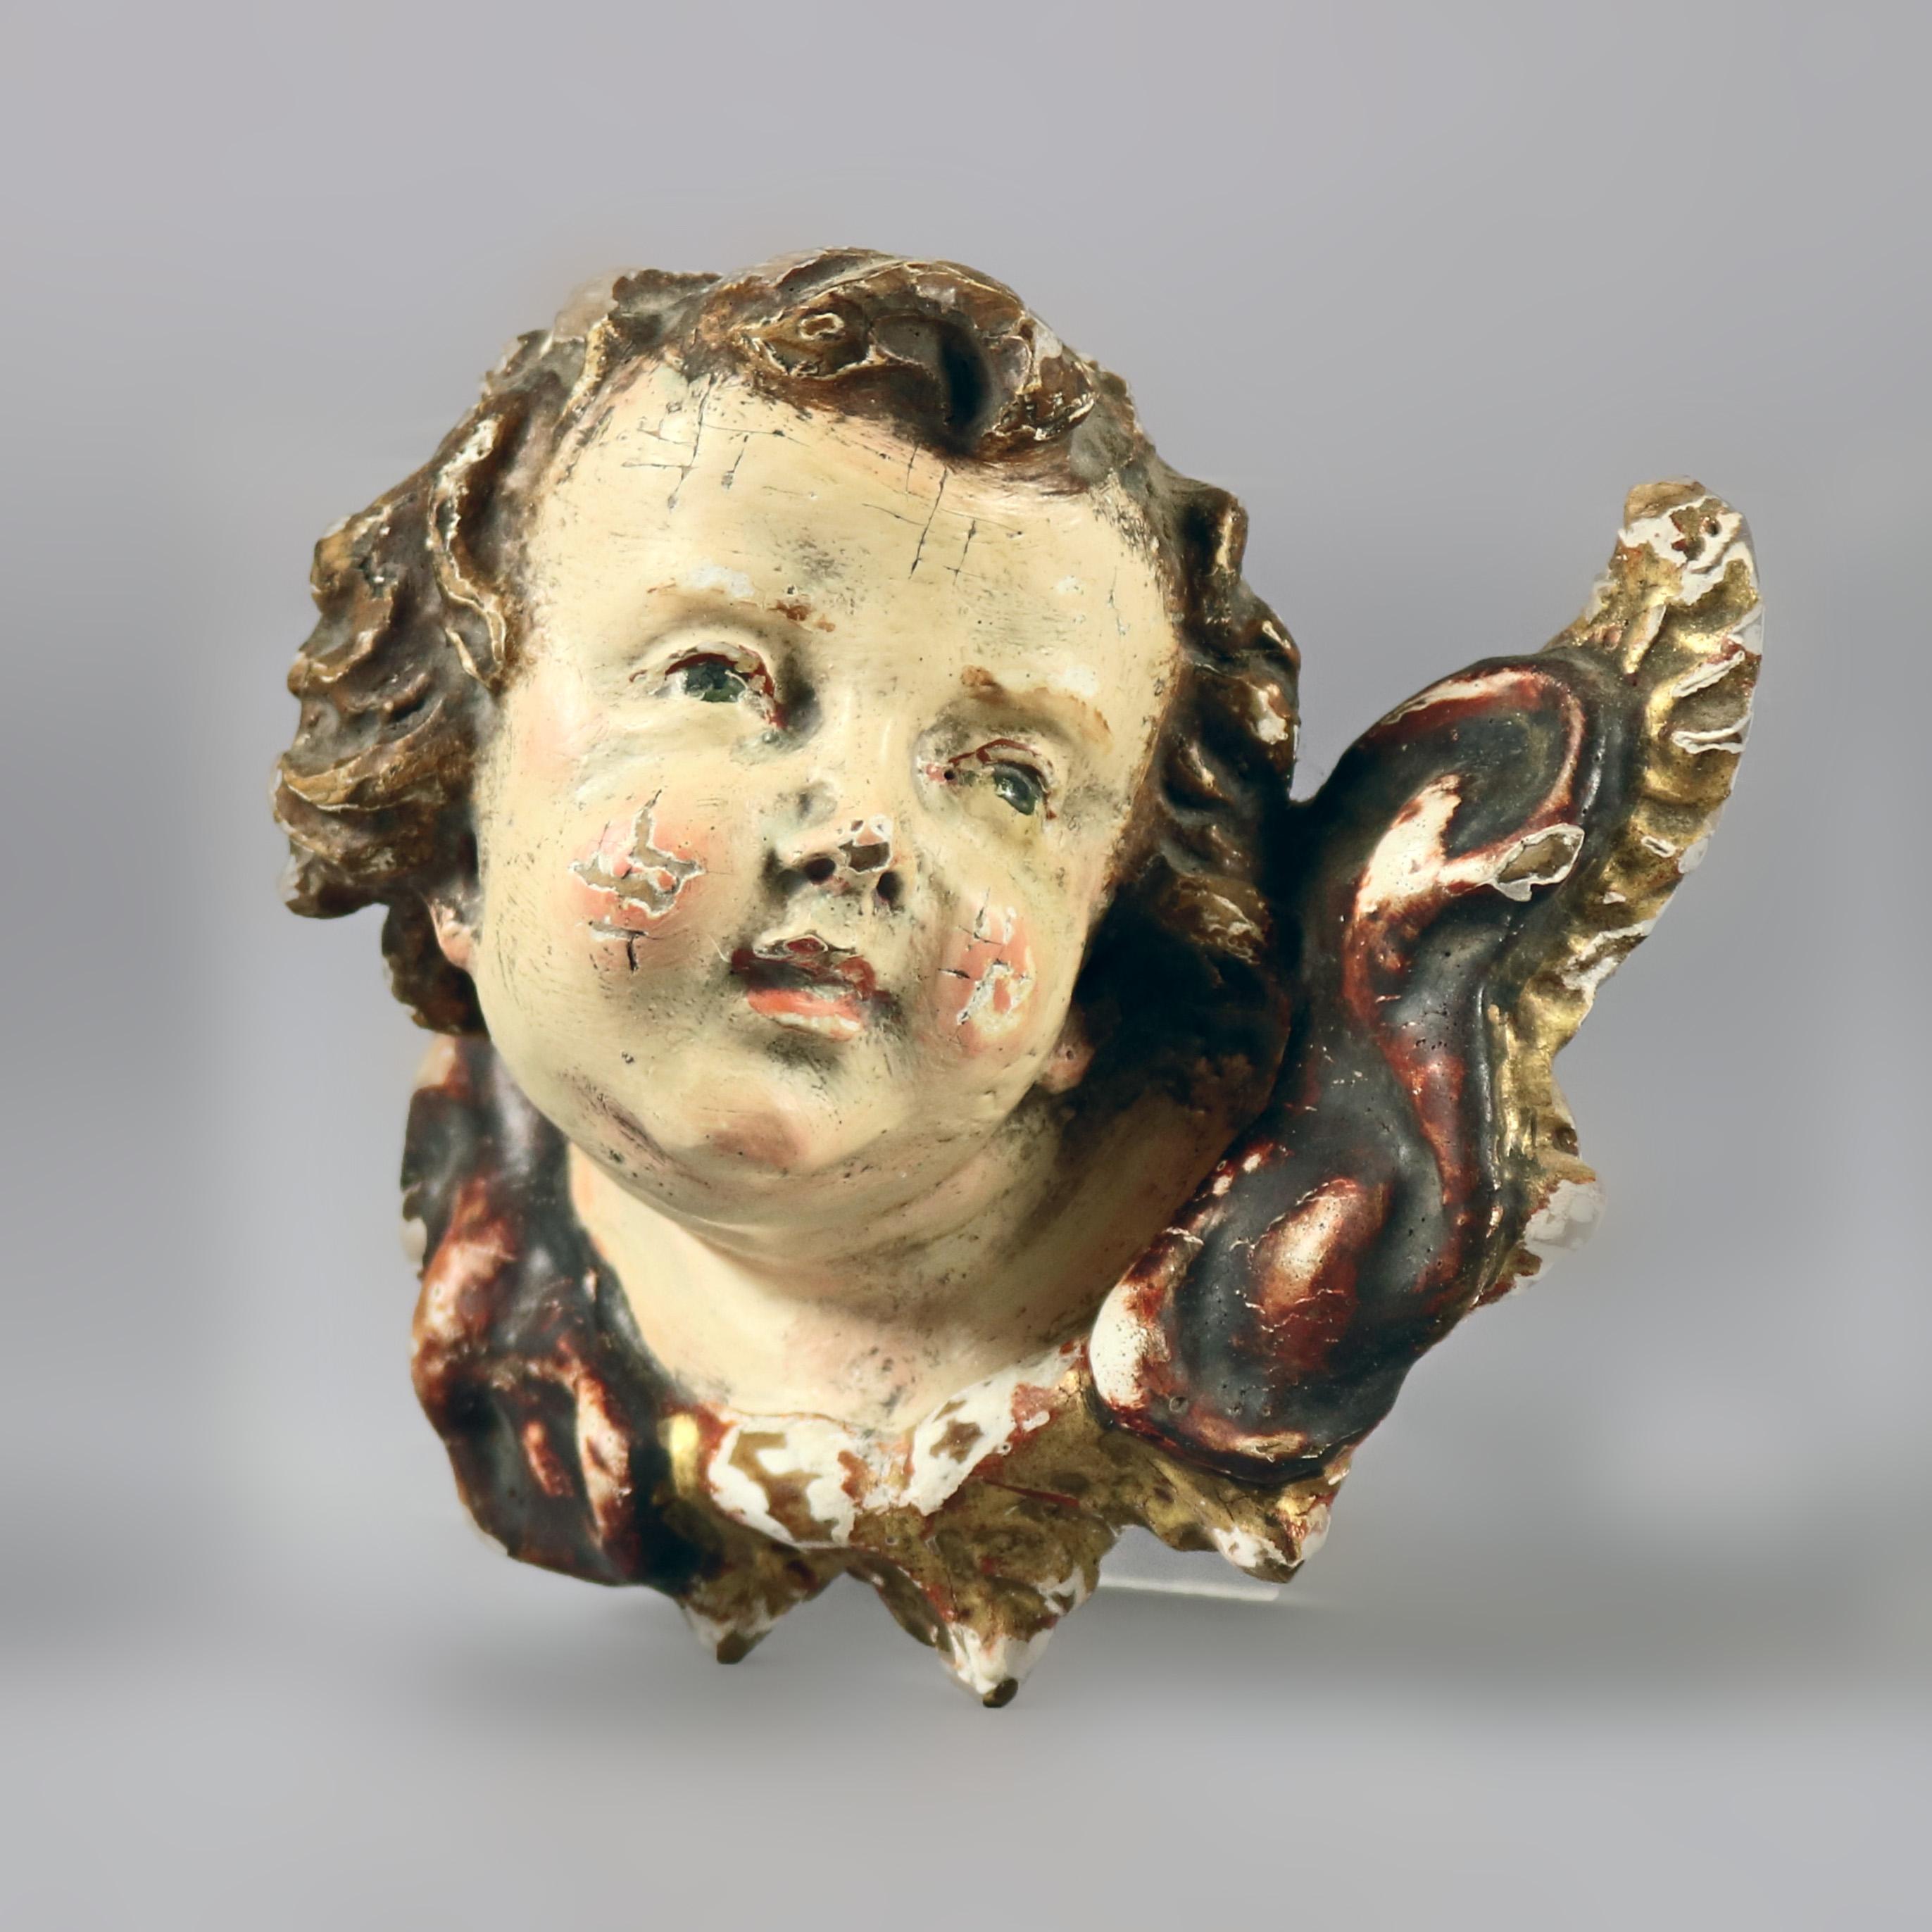 High Victorian French Polychrome Carved Wood Figural Cherub Wall Sculptures 19th Century, Pair